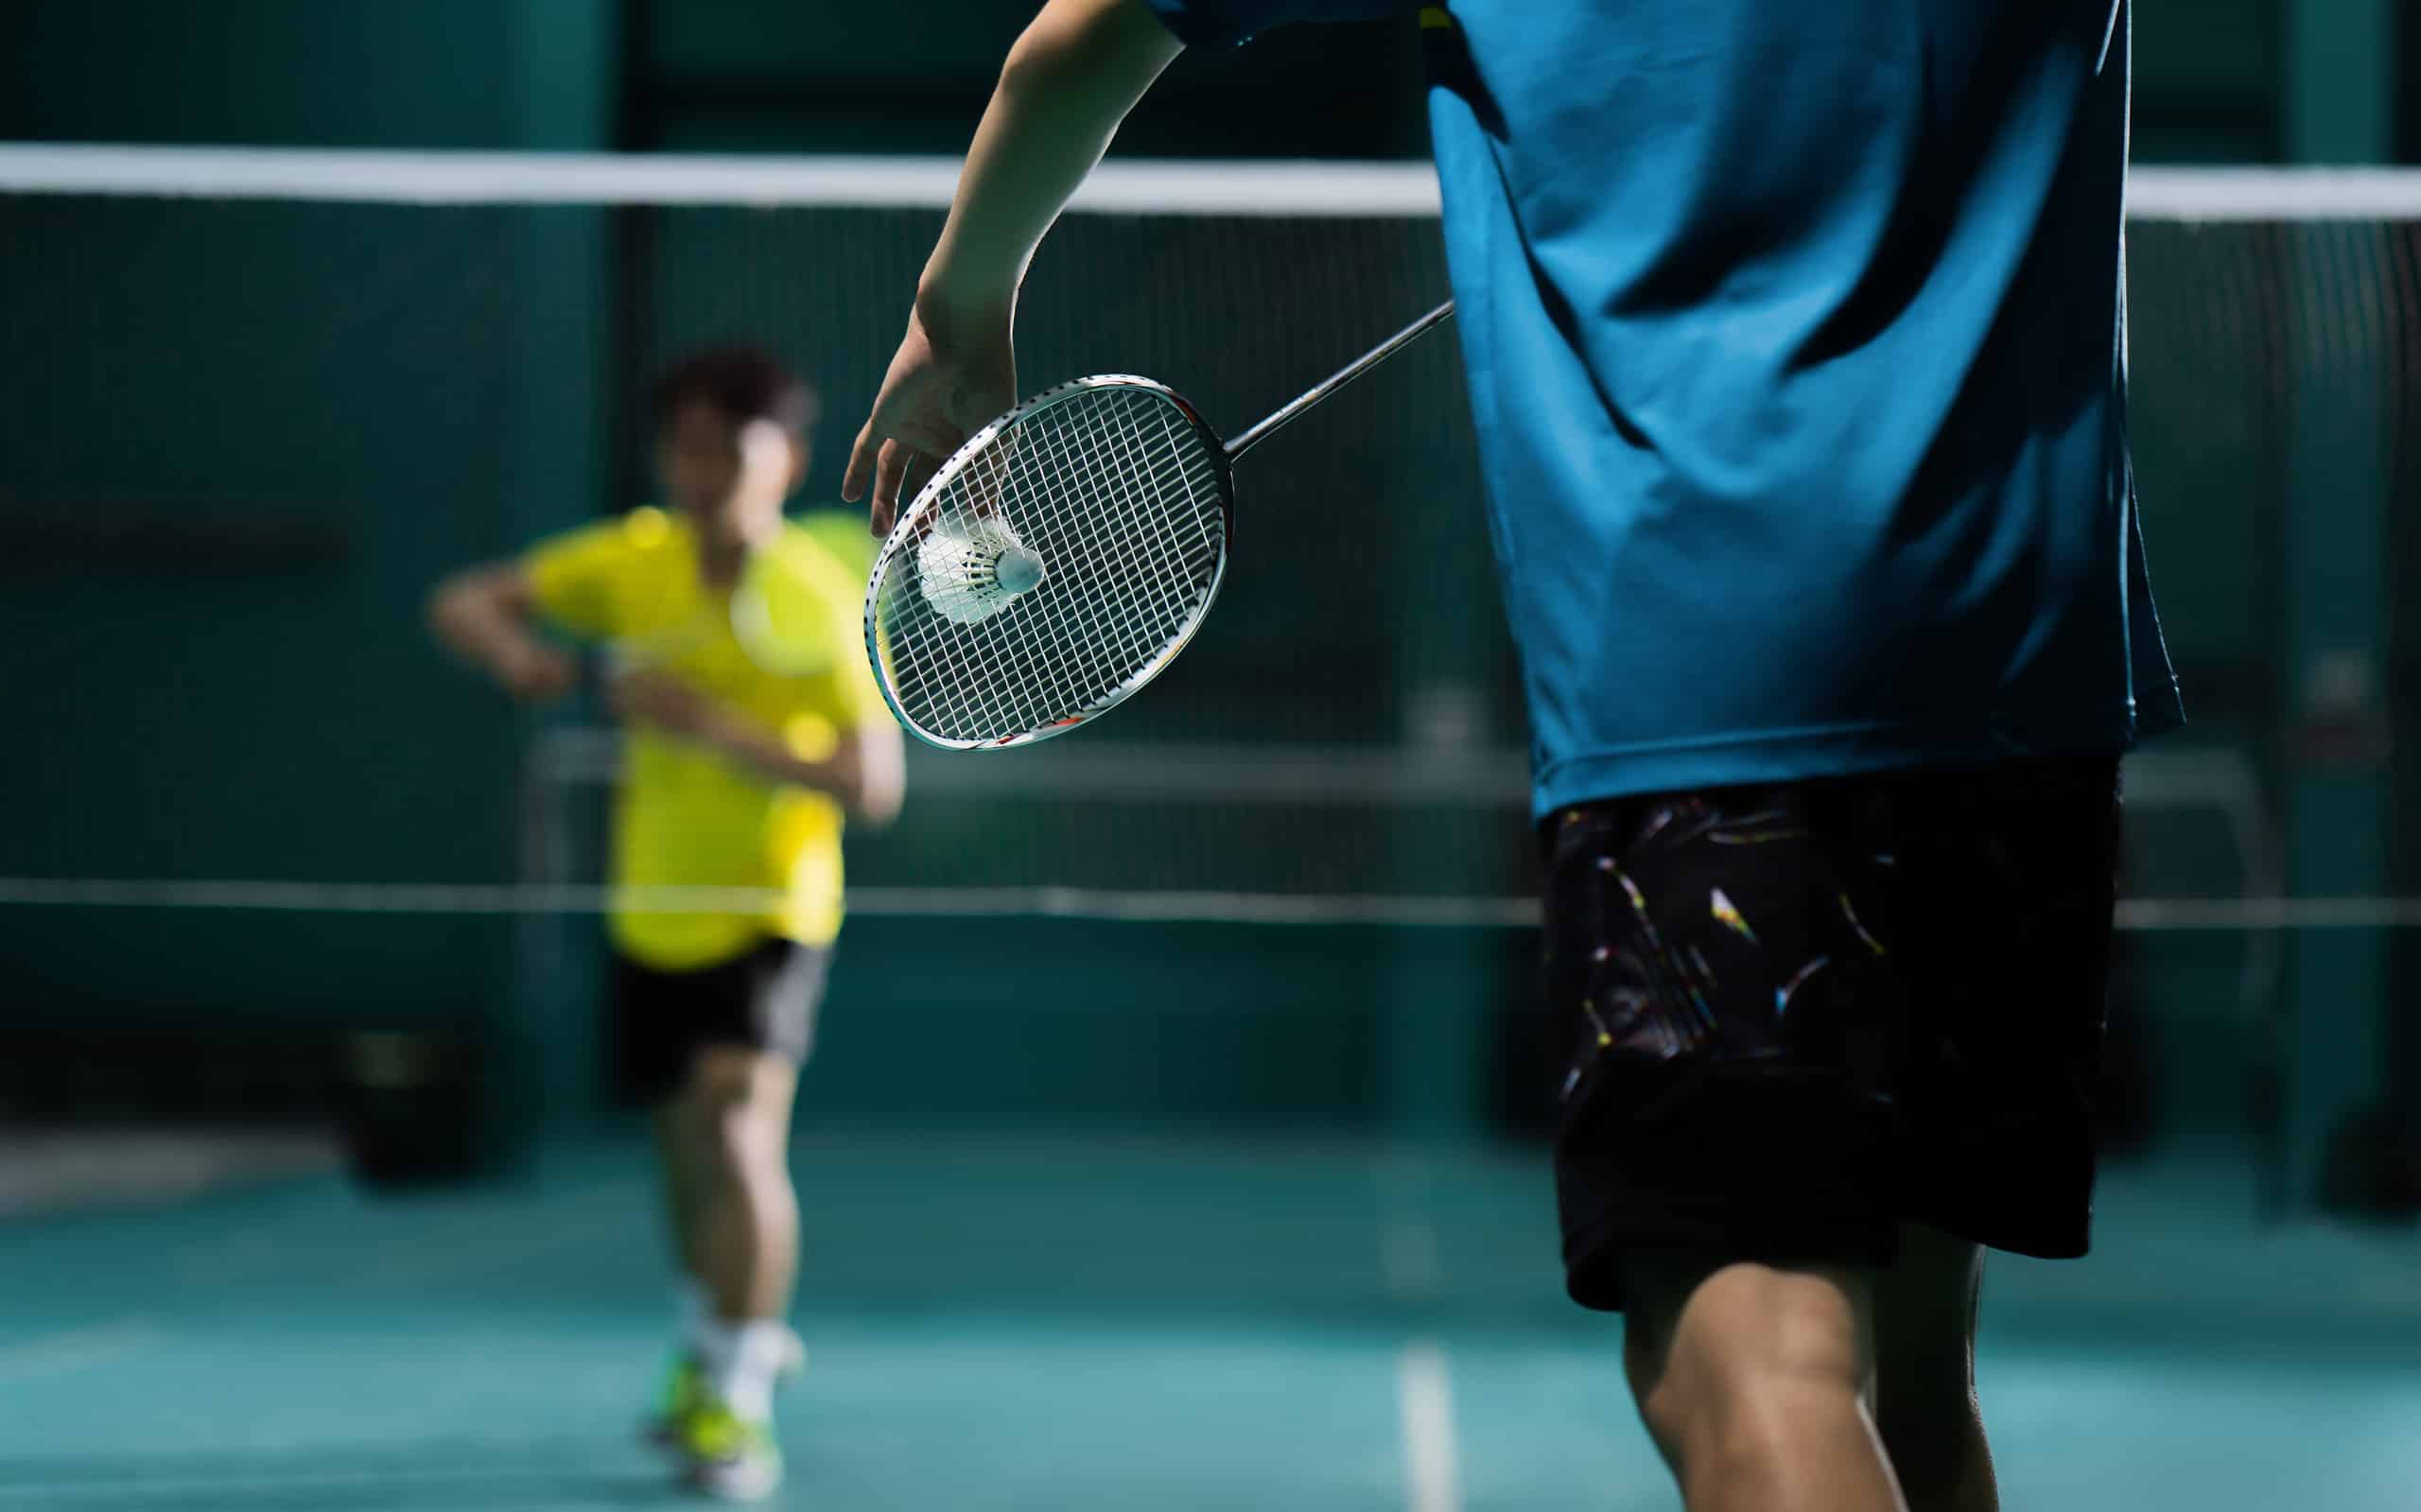 Badminton players engaging in a match.